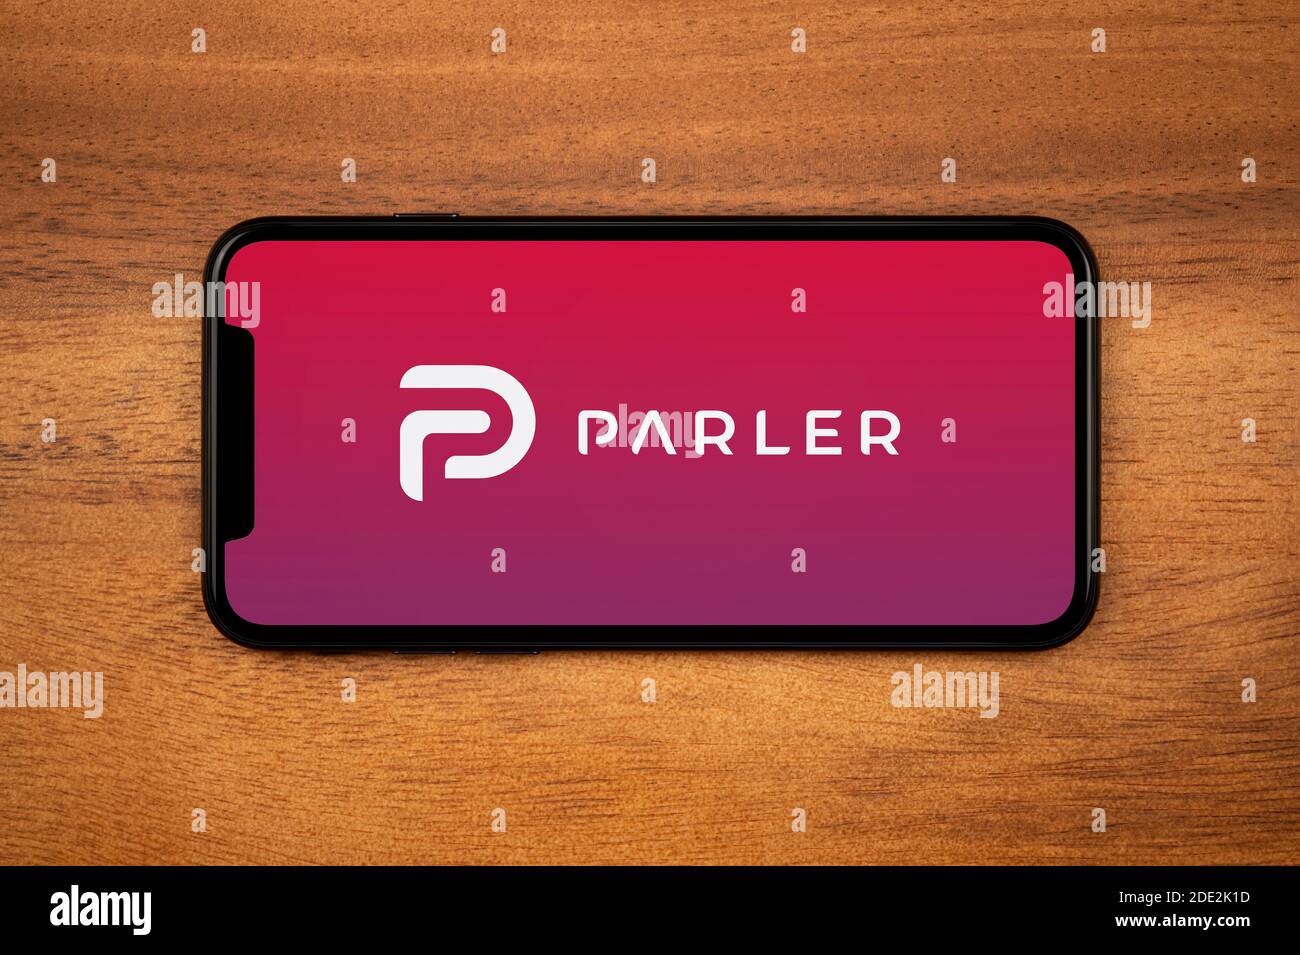 A smartphone showing the Parler logo rests on a plain wooden table (Editorial use only). Stock Photo